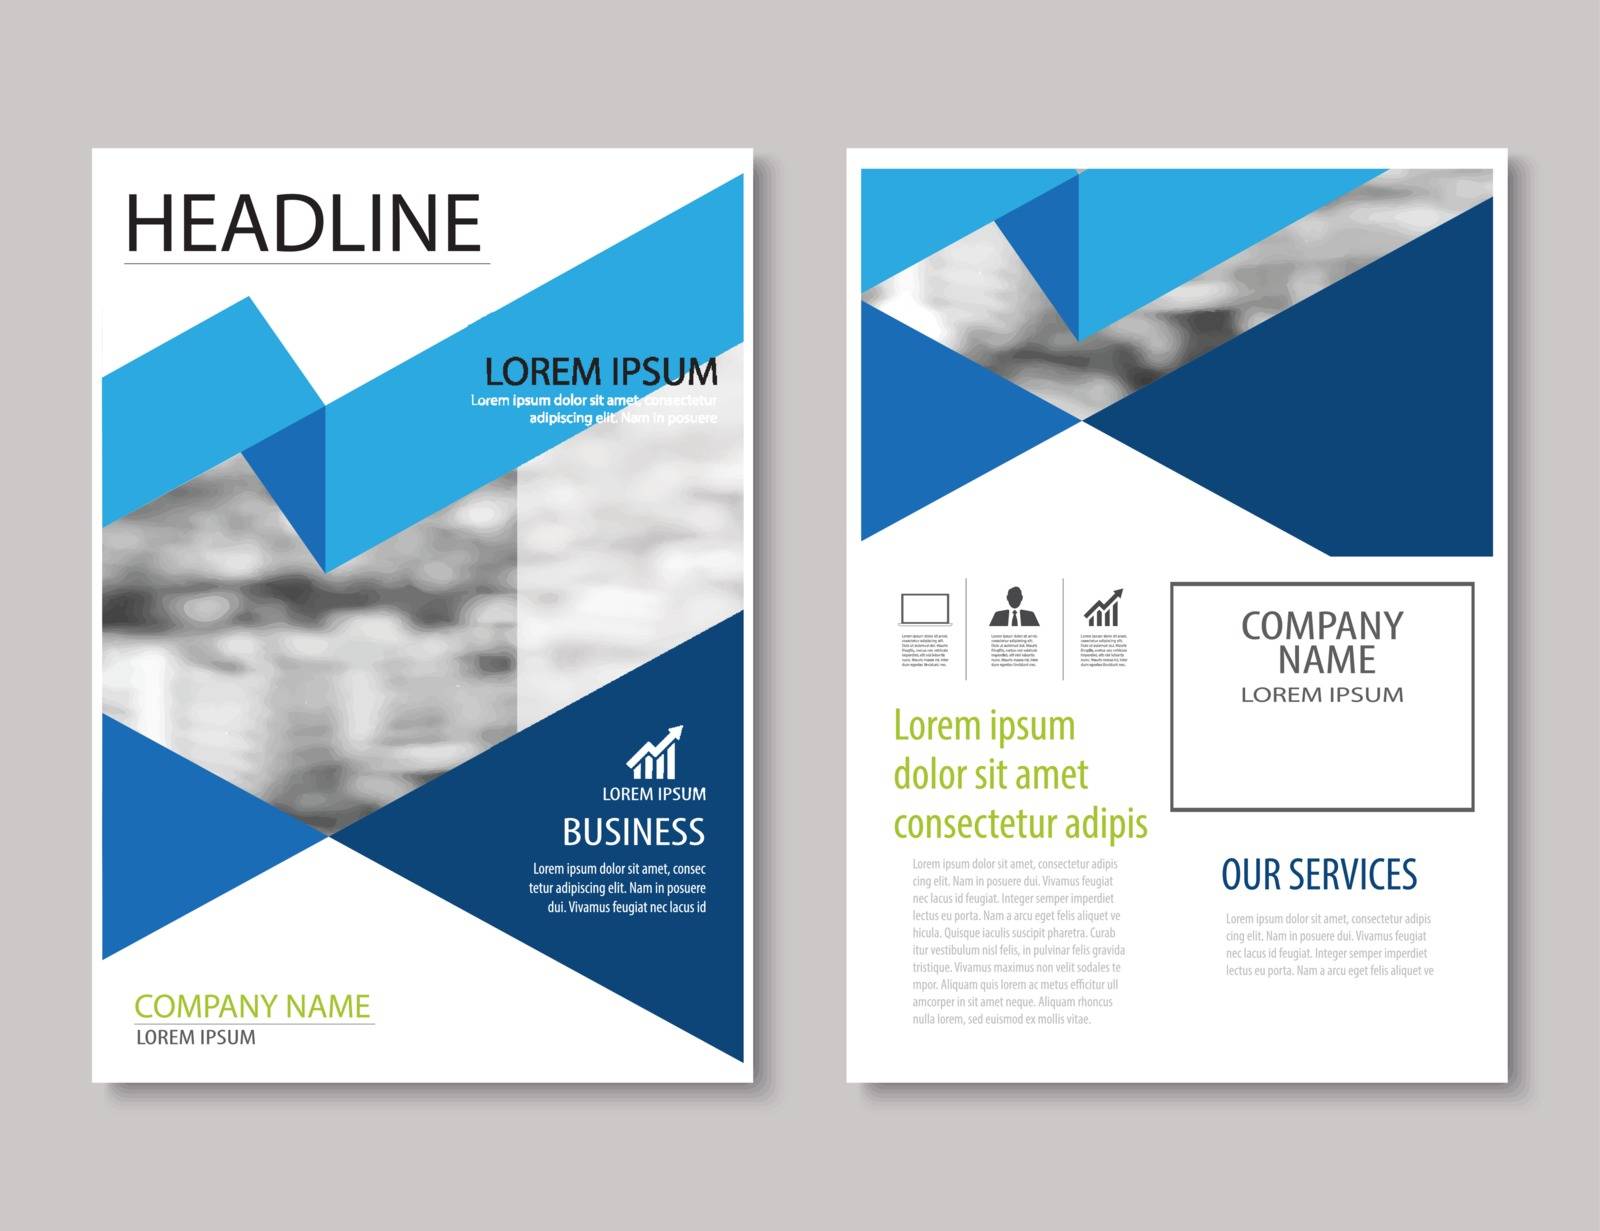 annual report brochure flyer design template vector, Leaflet cov by kaisorn